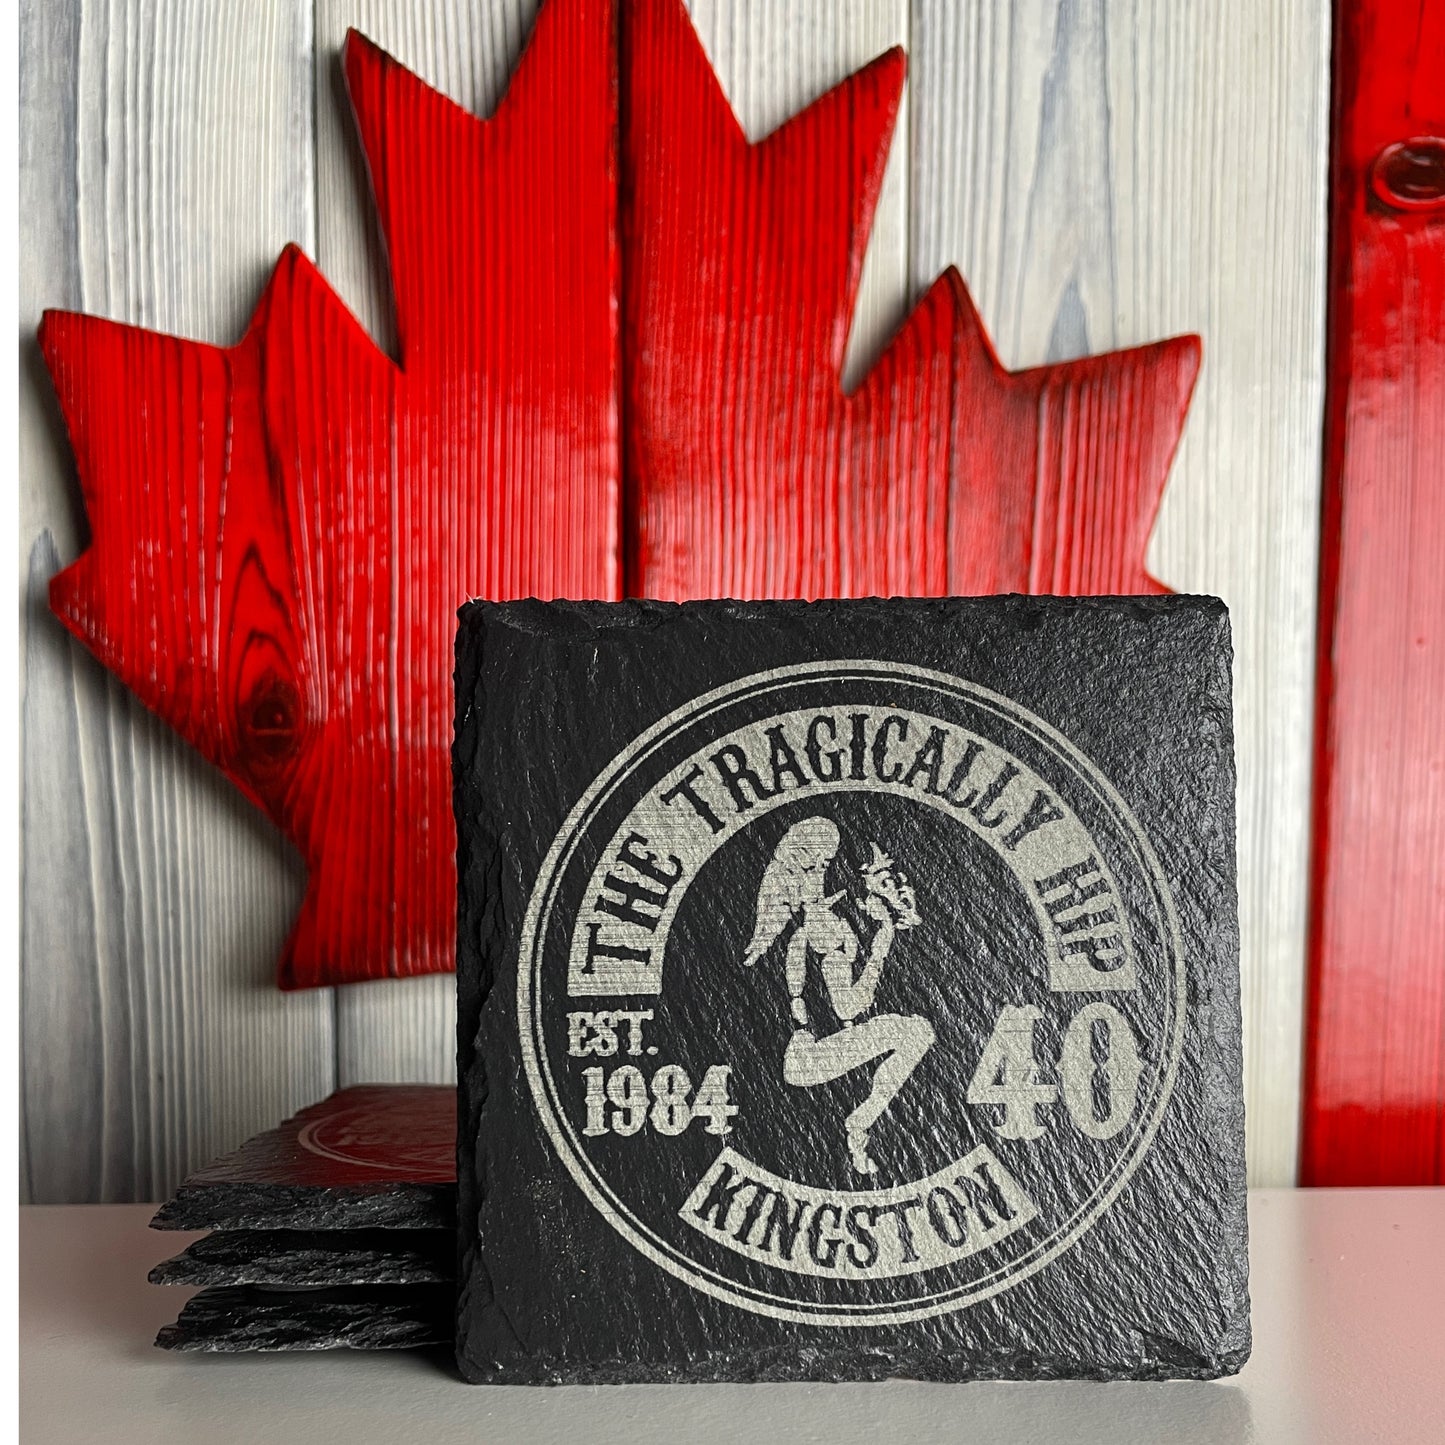 The Tragically HIP 40th Anniversary Slate Coaters Set of 4